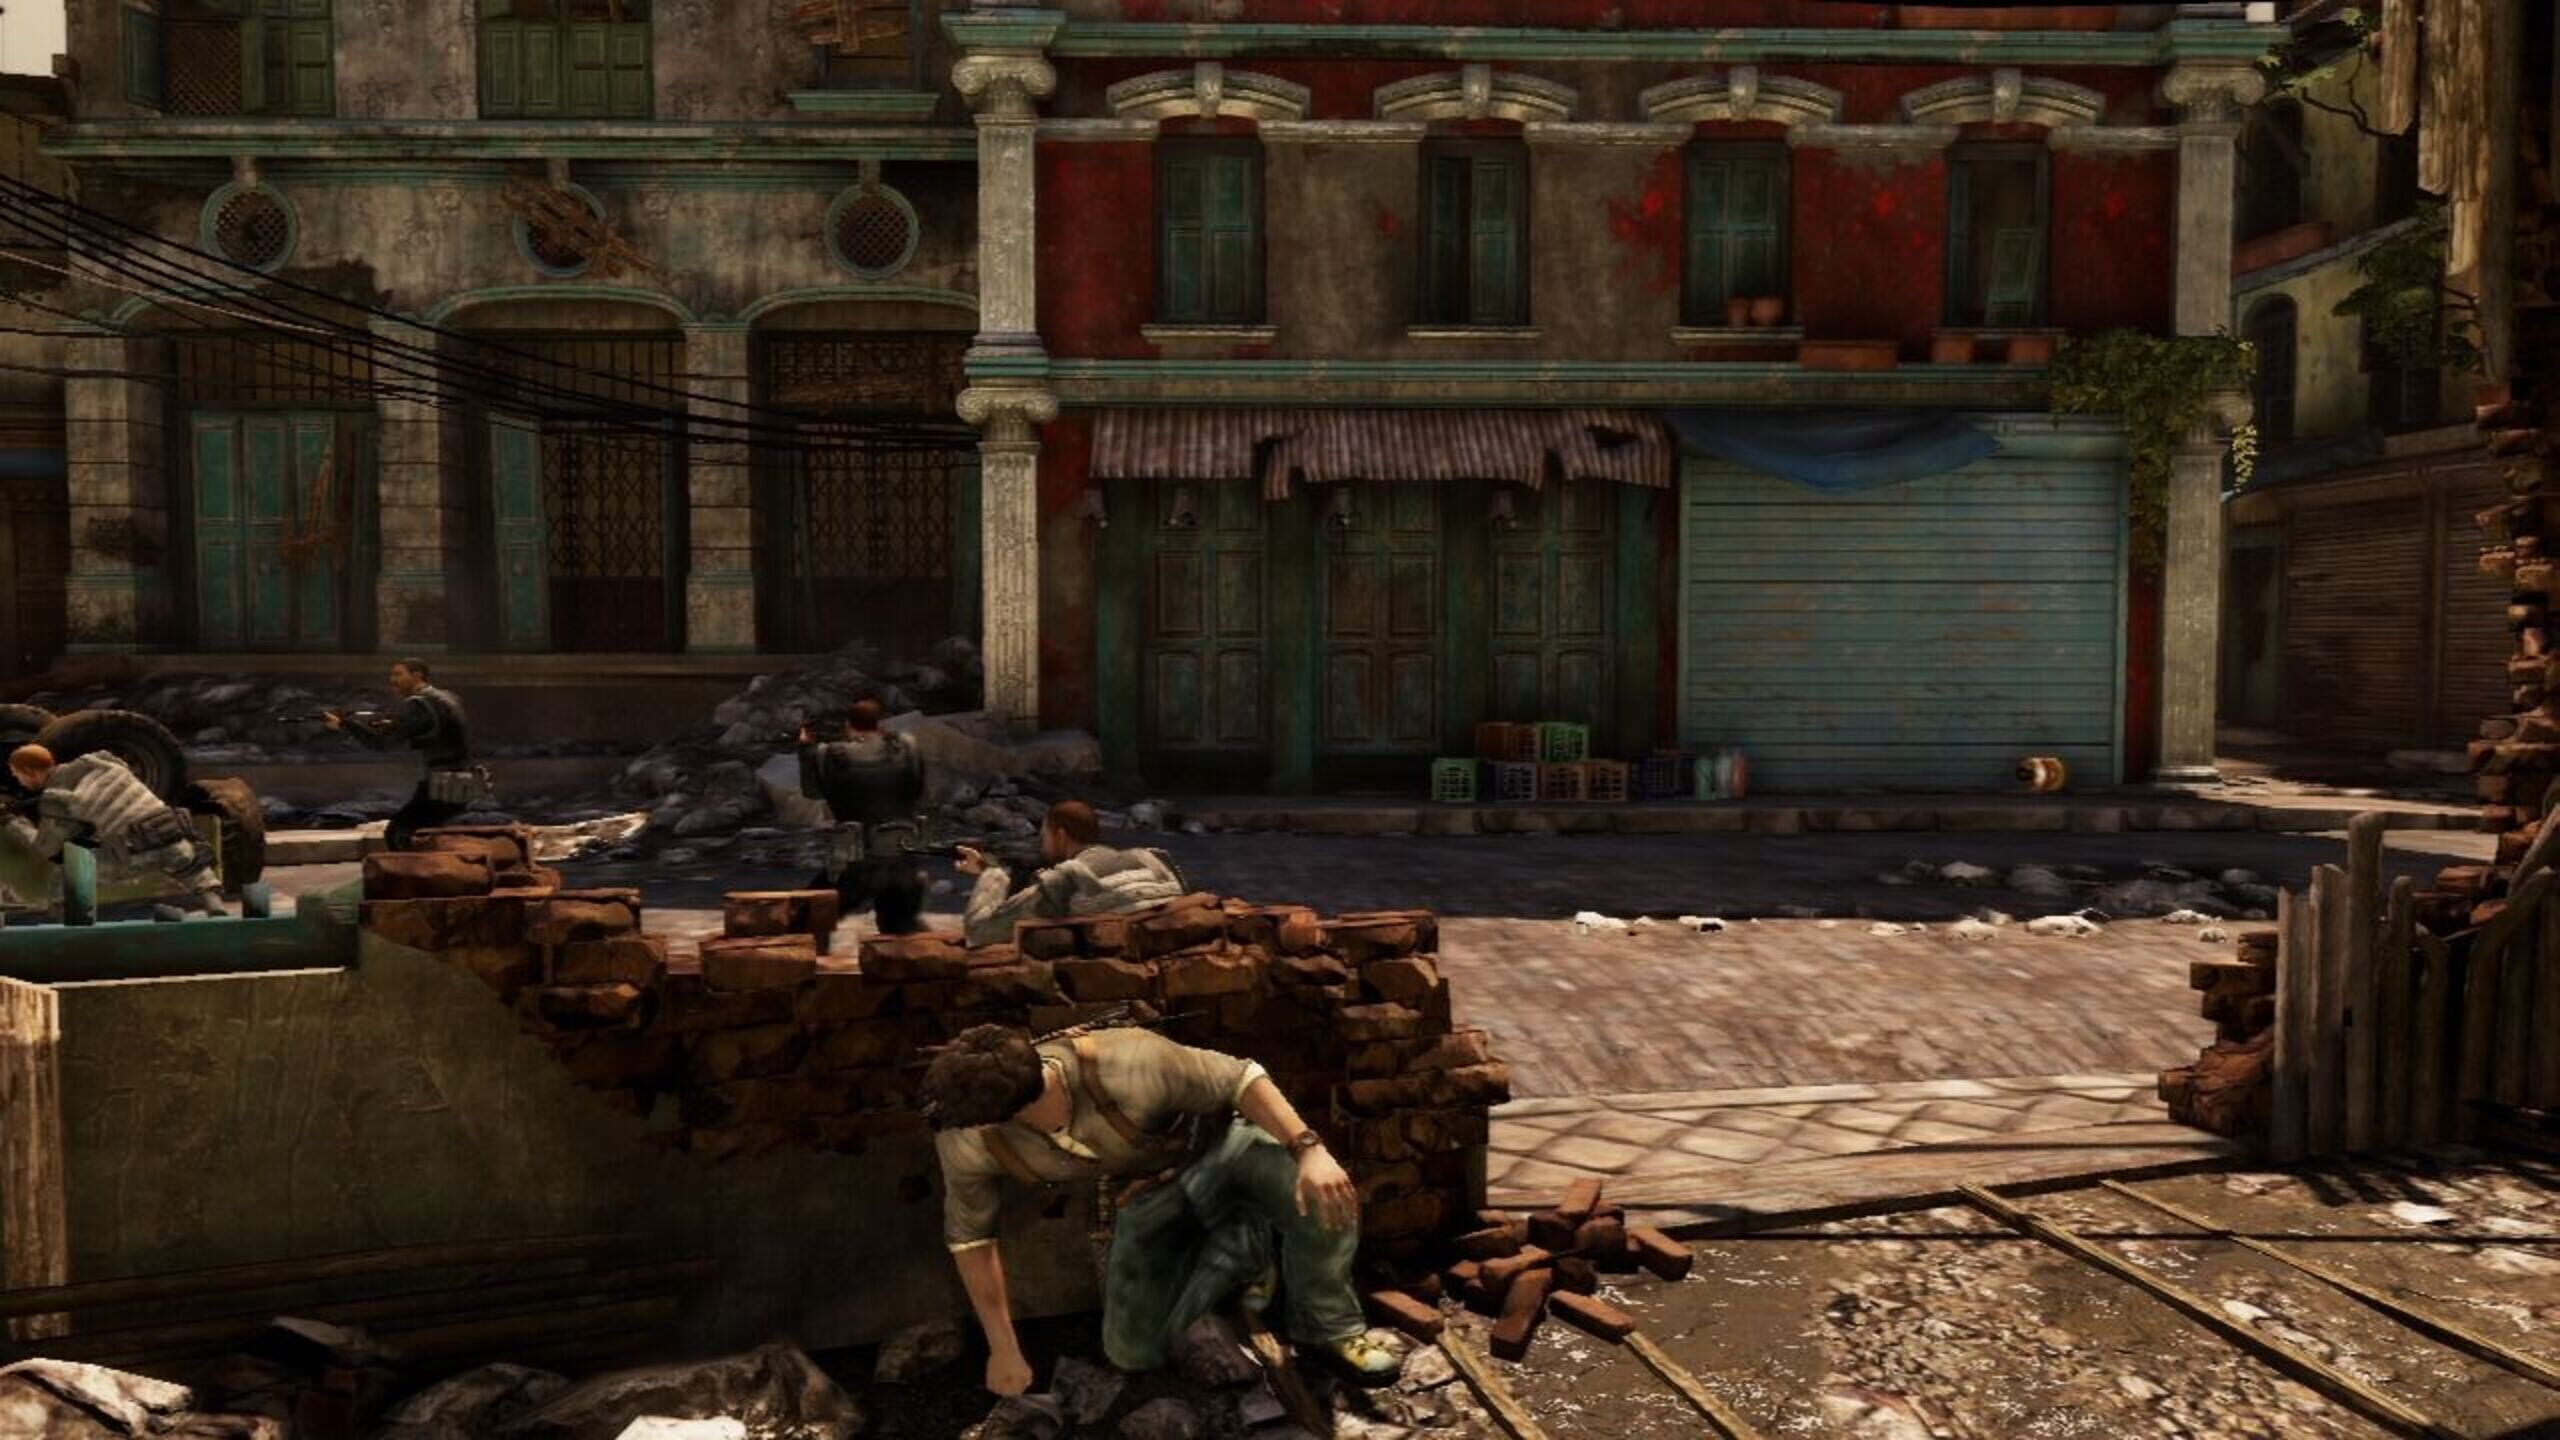 Screenshot do game Uncharted 2: Among Thieves